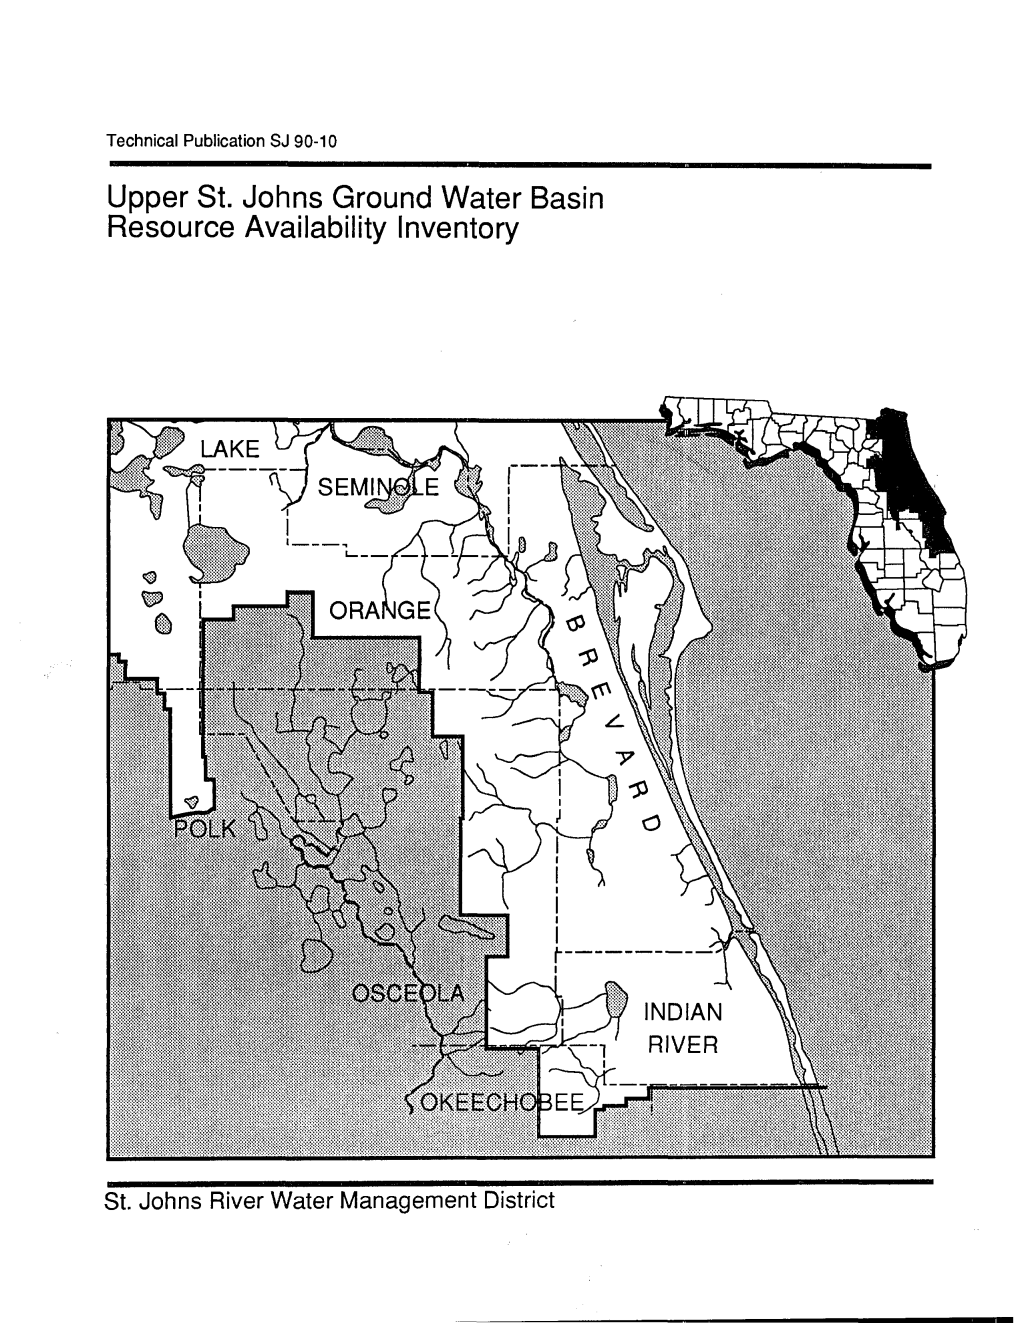 Upper St. Johns Ground Water Basin Resource Availability Inventory